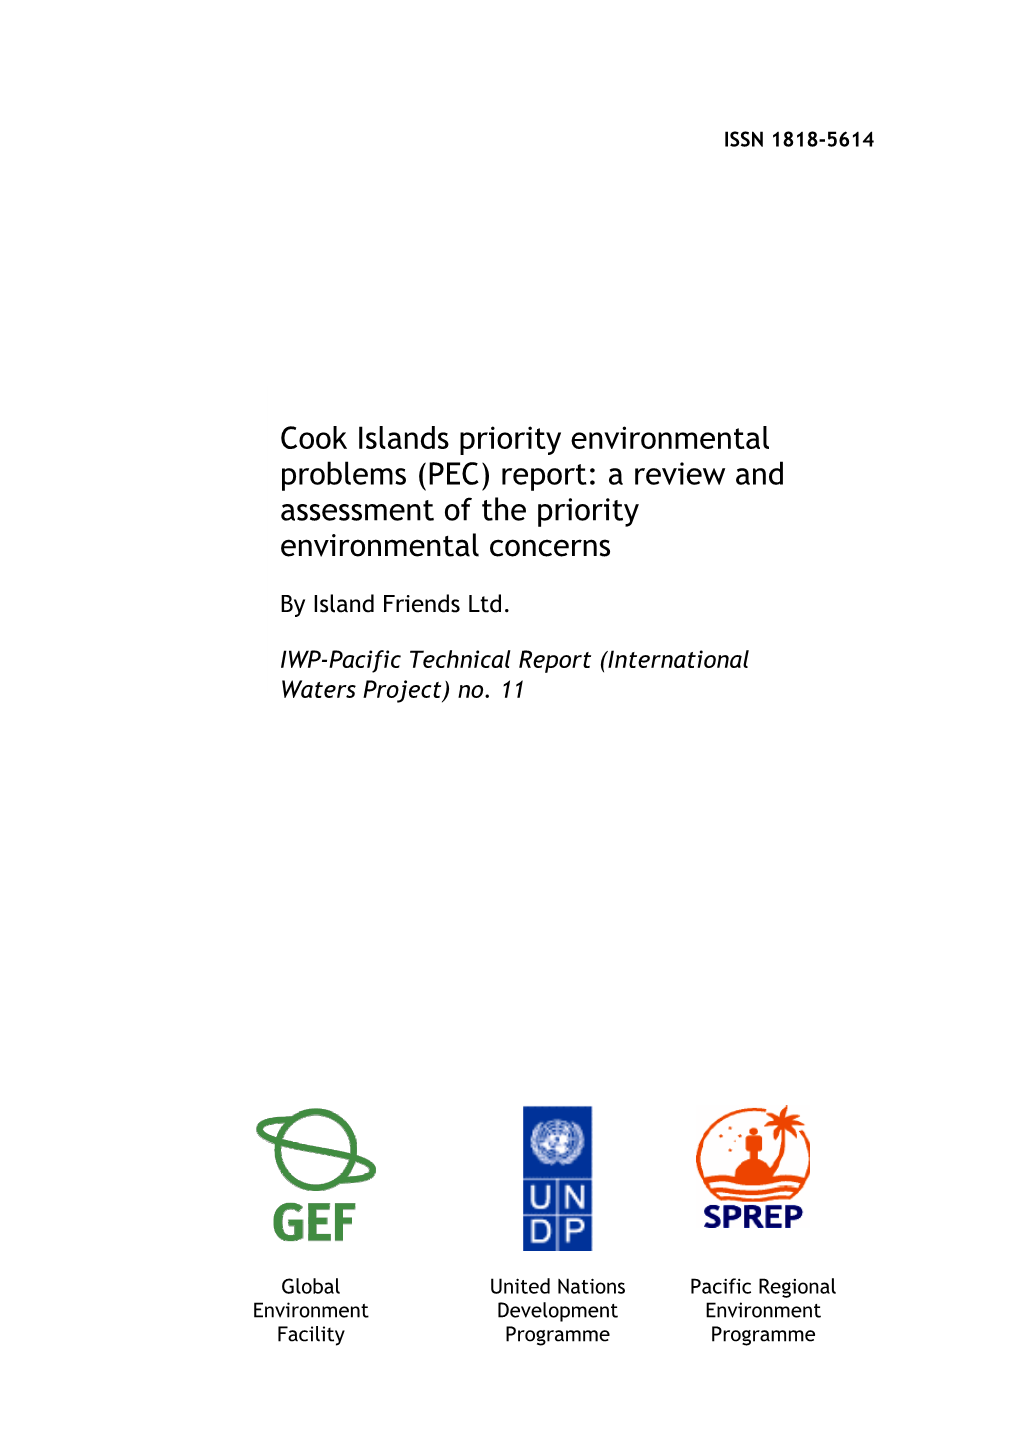 Cook Islands Priority Environmental Problems (PEC) Report: a Review and Assessment of the Priority Environmental Concerns